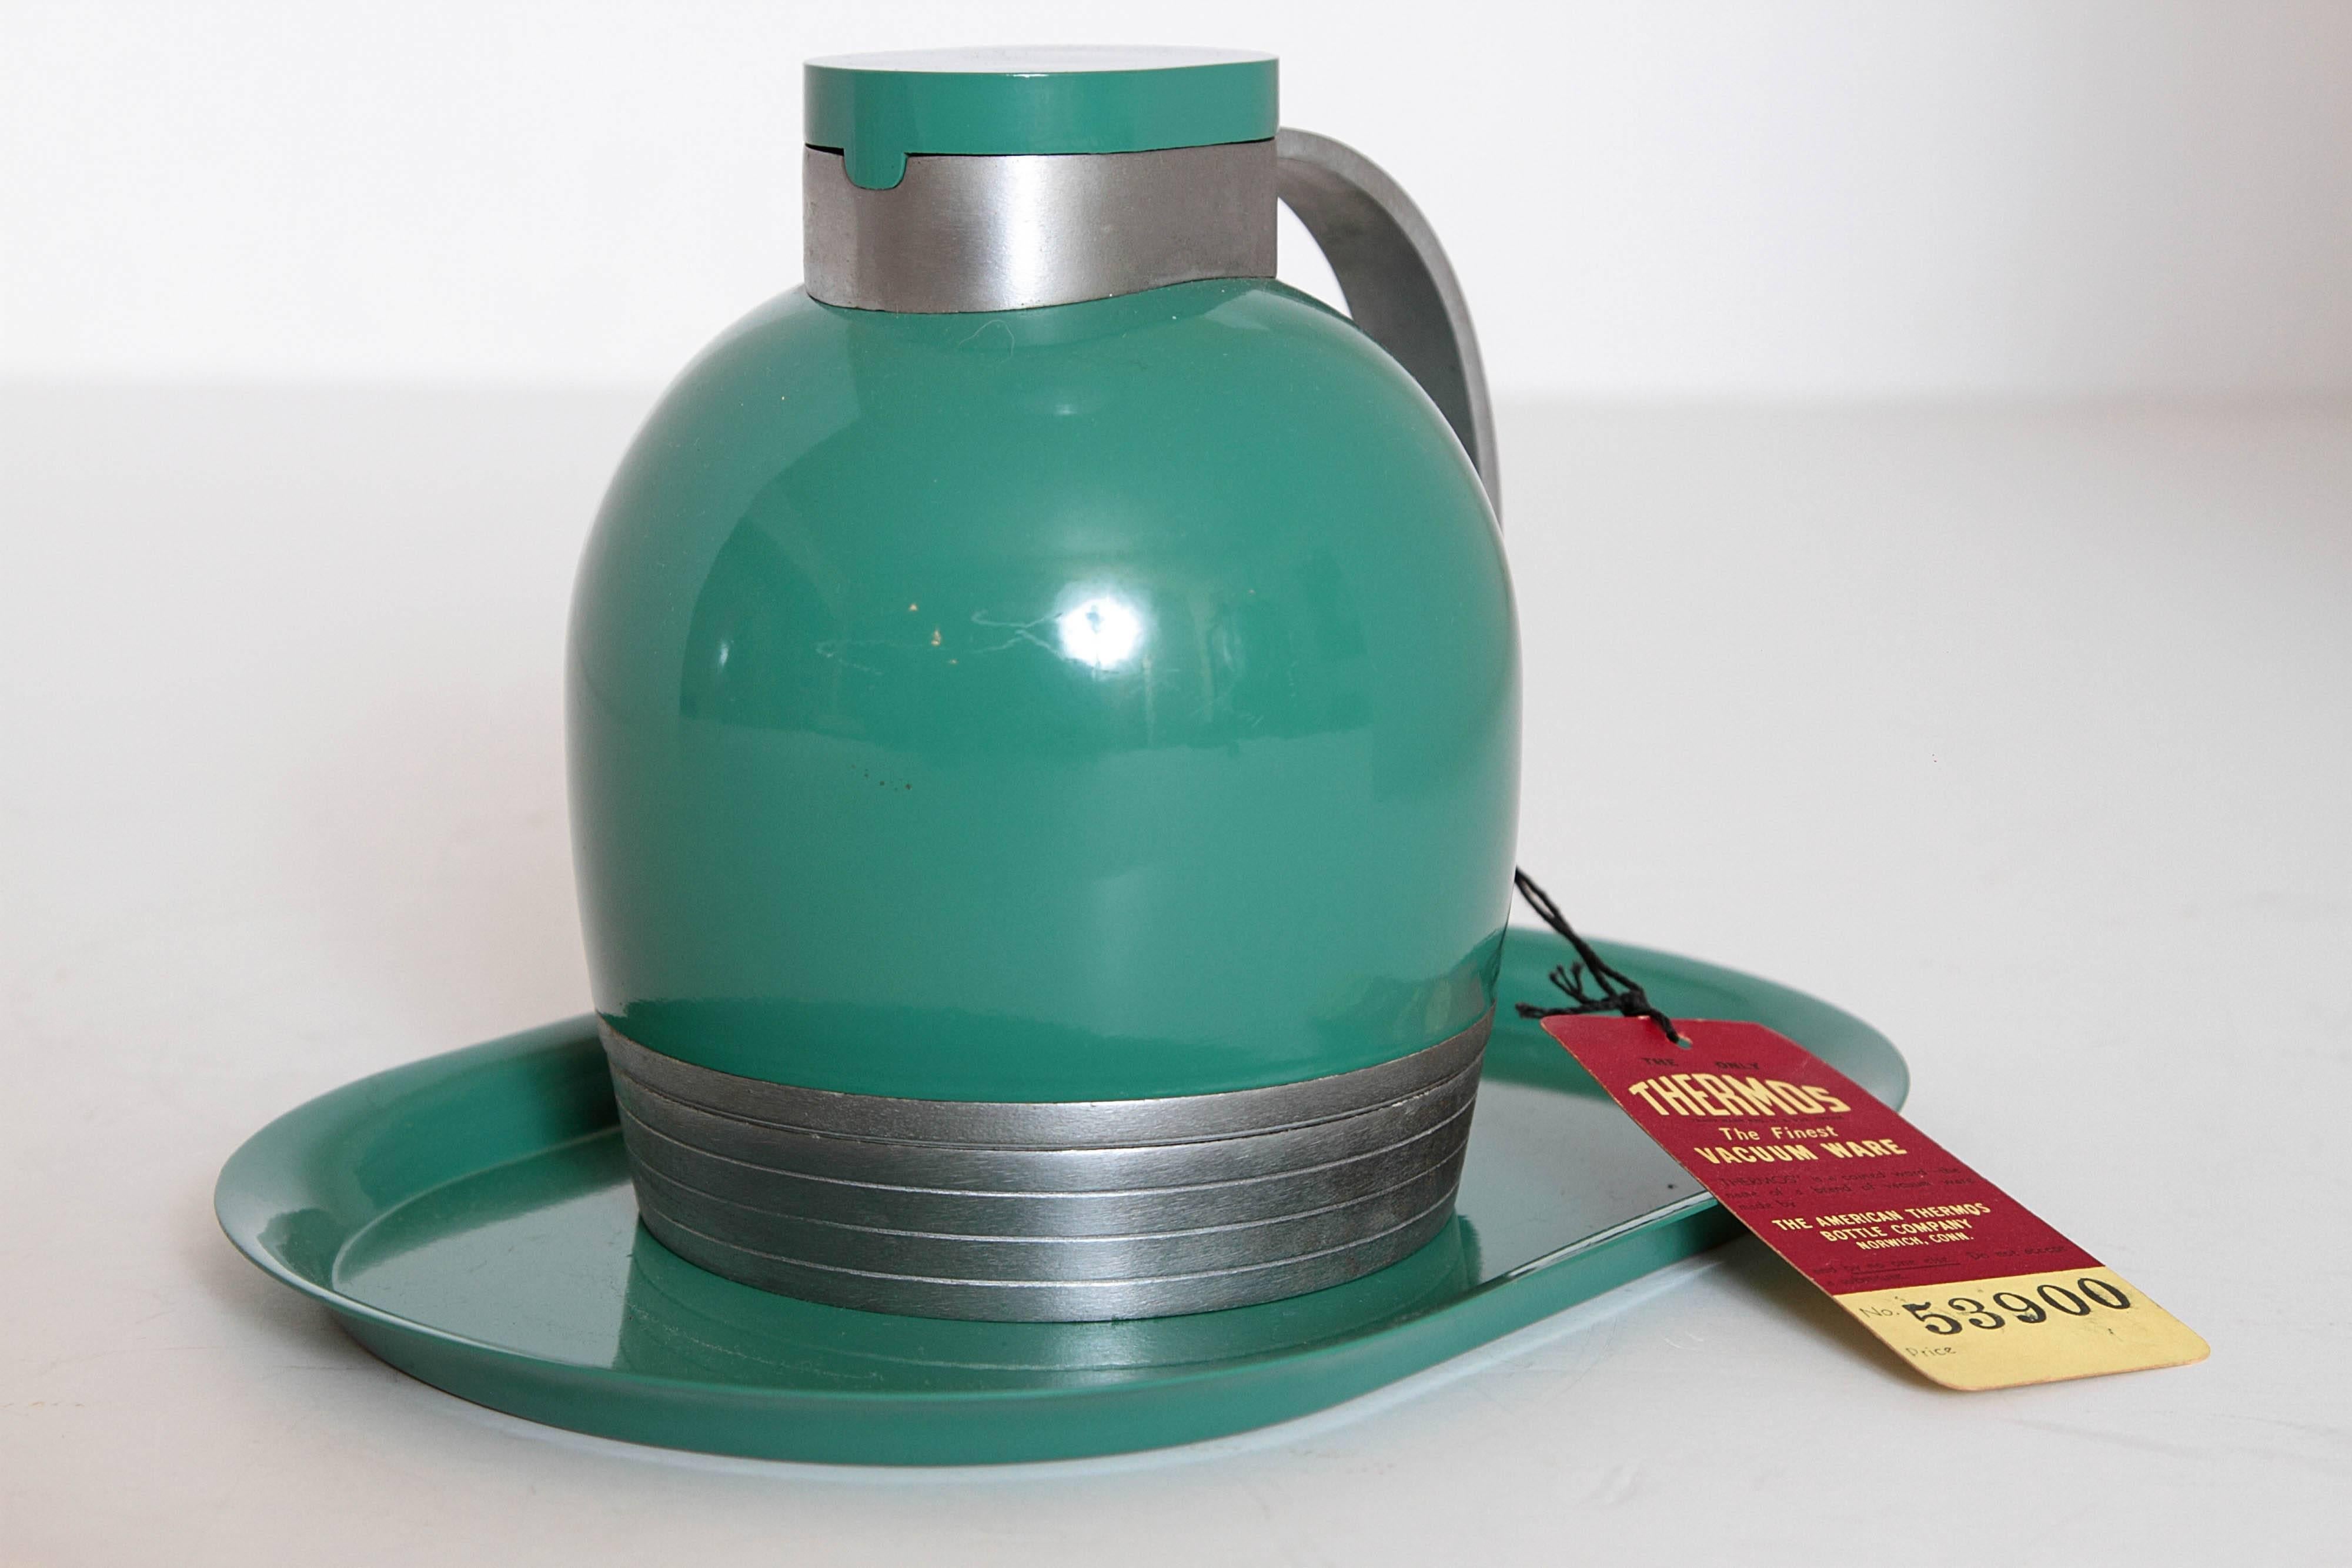 Machine Age Art Deco Henry Dreyfuss #539 Thermos, original tray and tag, museum quality modernist streamline iconic Industrial design

Great rarer green color, tray, cap, under-base flocking and tag.
No water bubbling damage on top, likely